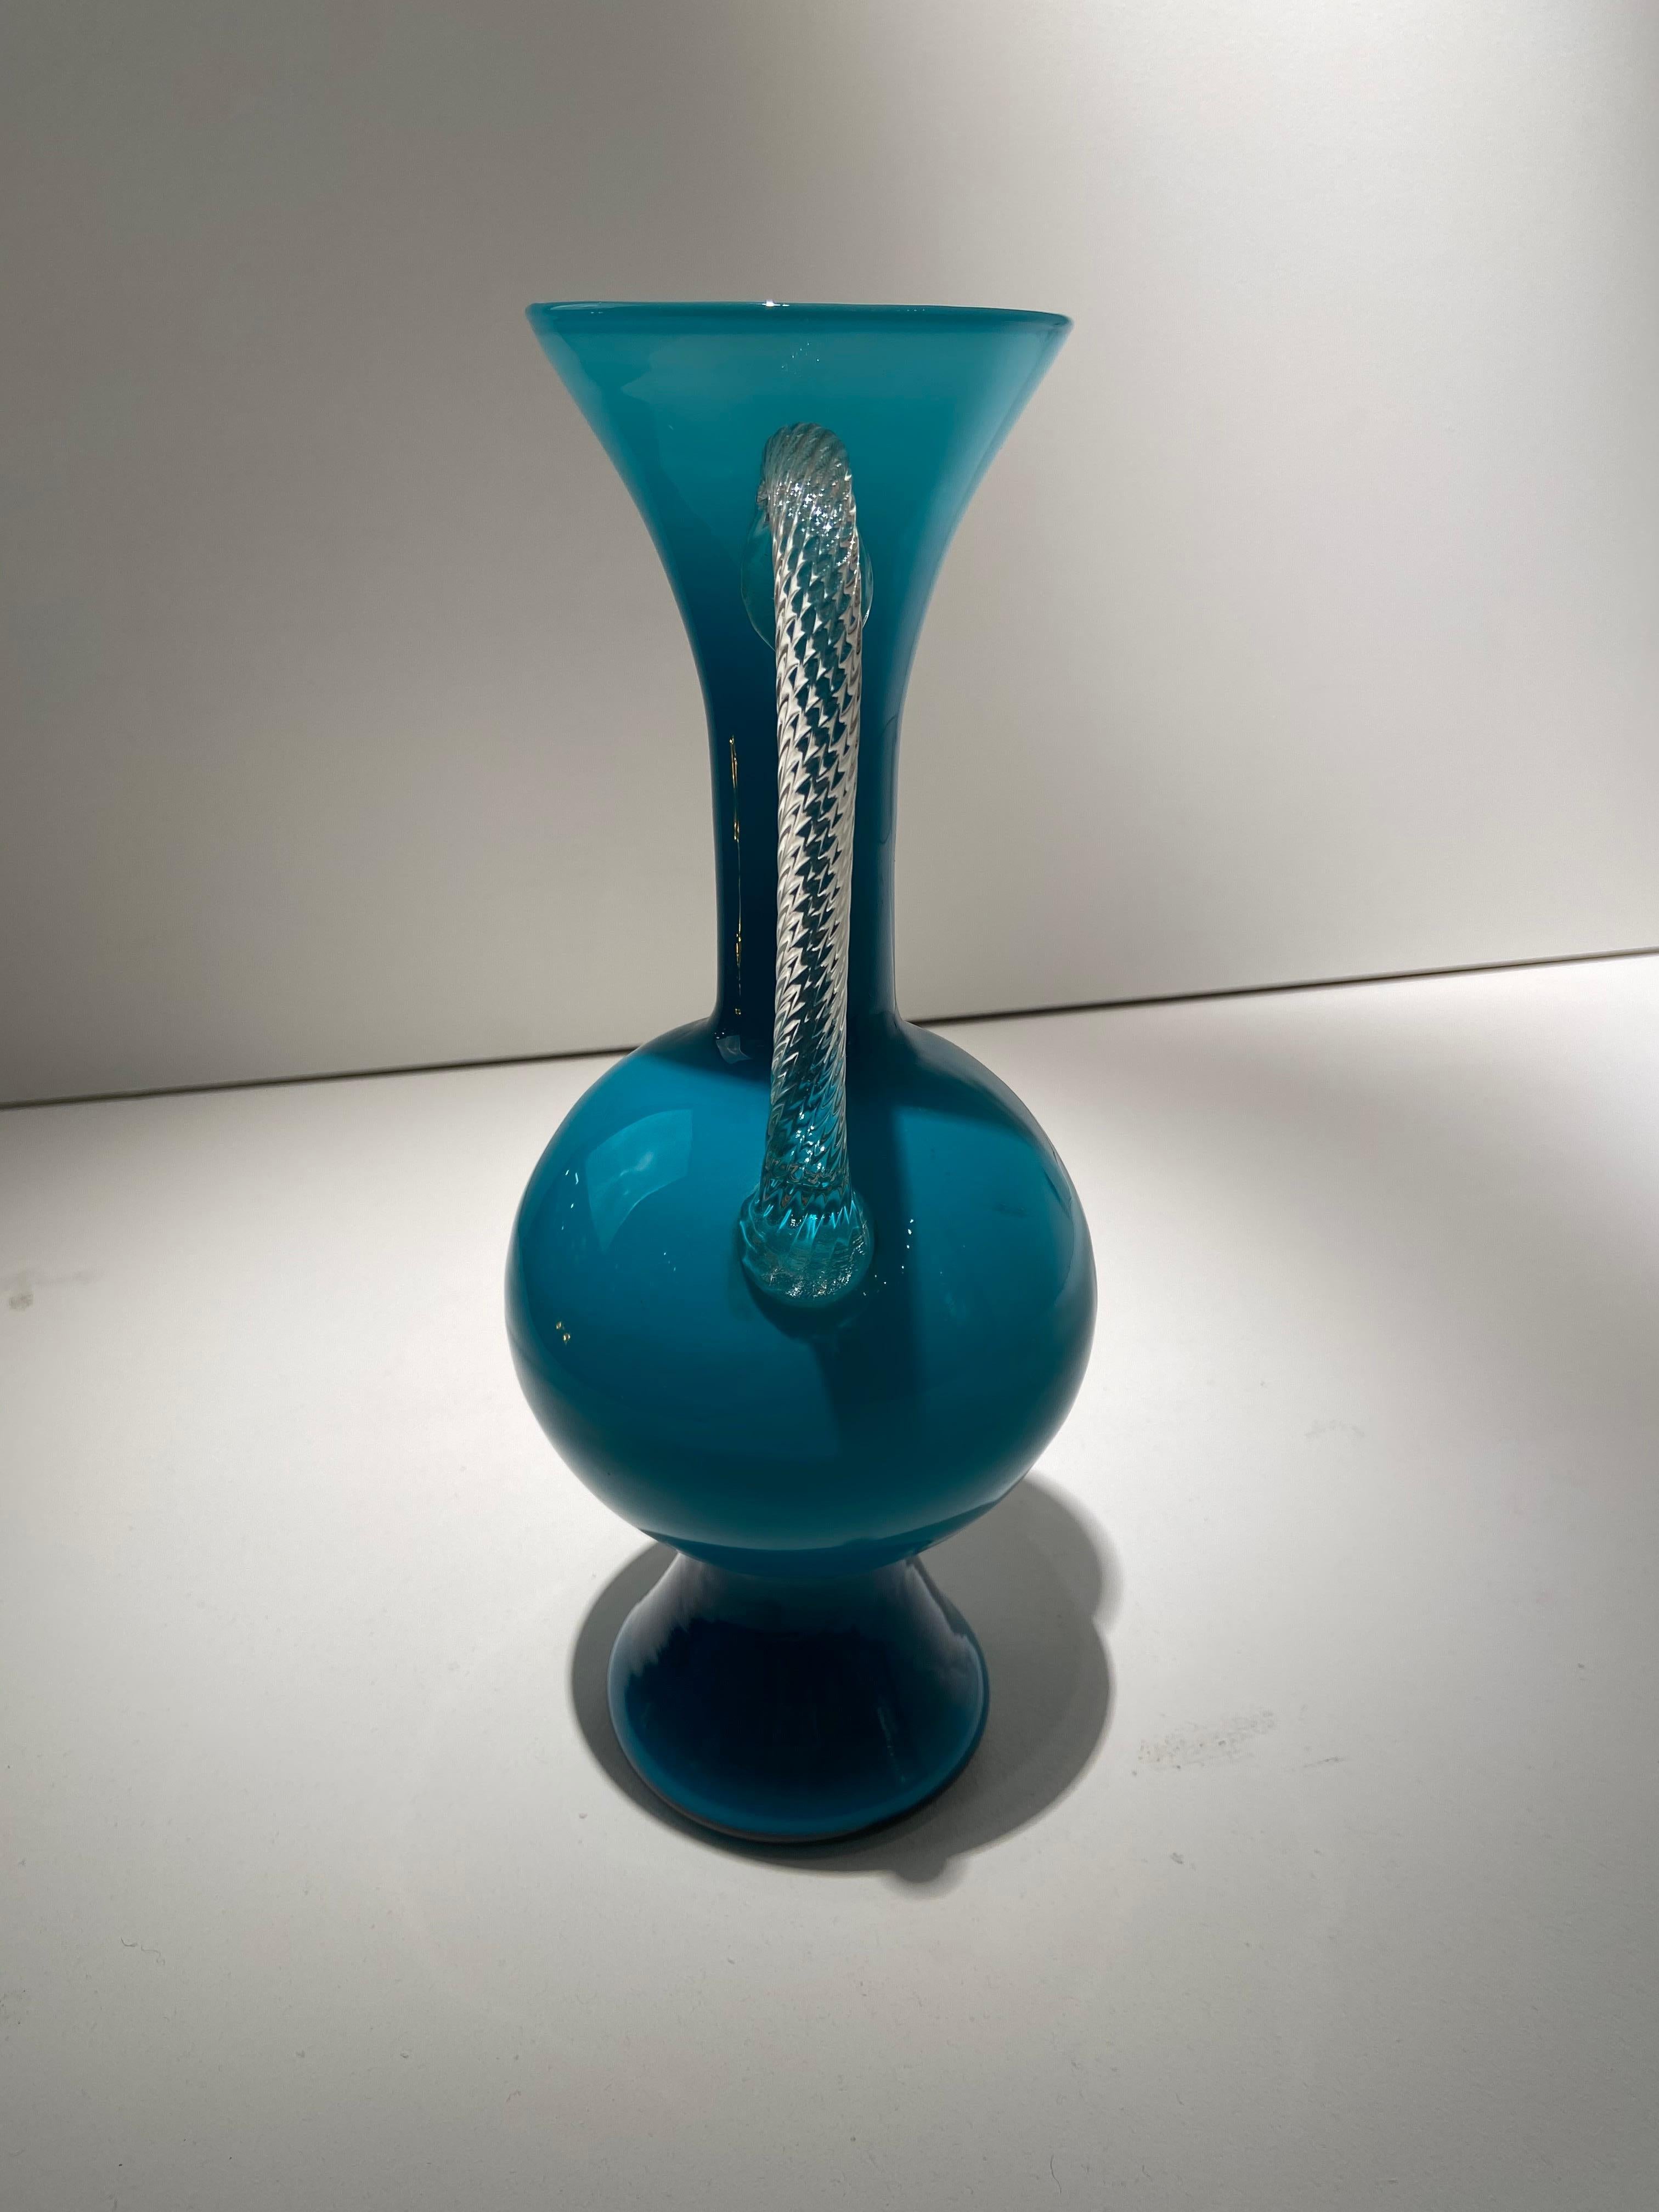 Empoli Art Glass Pitcher In Excellent Condition For Sale In Brussels, Brussels